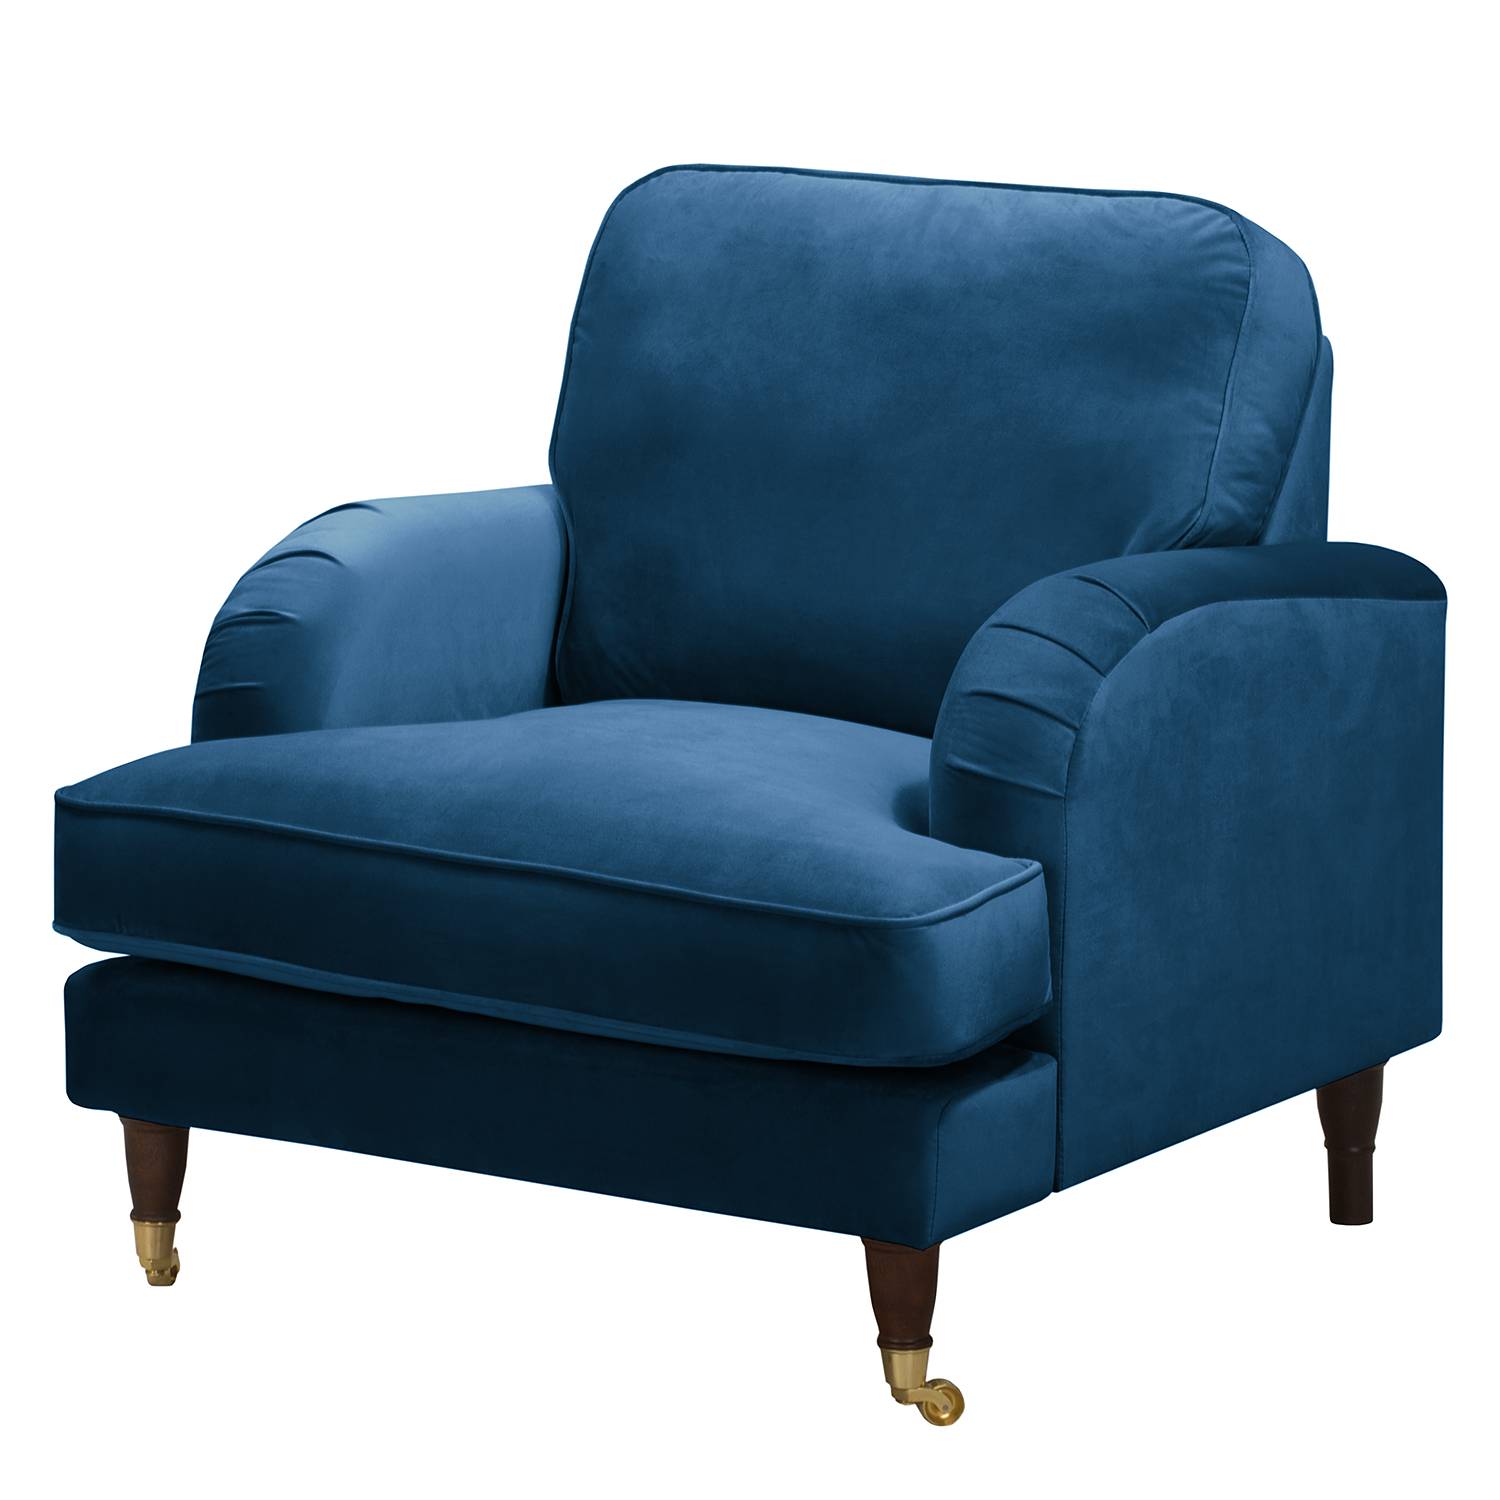 Image of Fauteuil Bethania I 000000001000145874